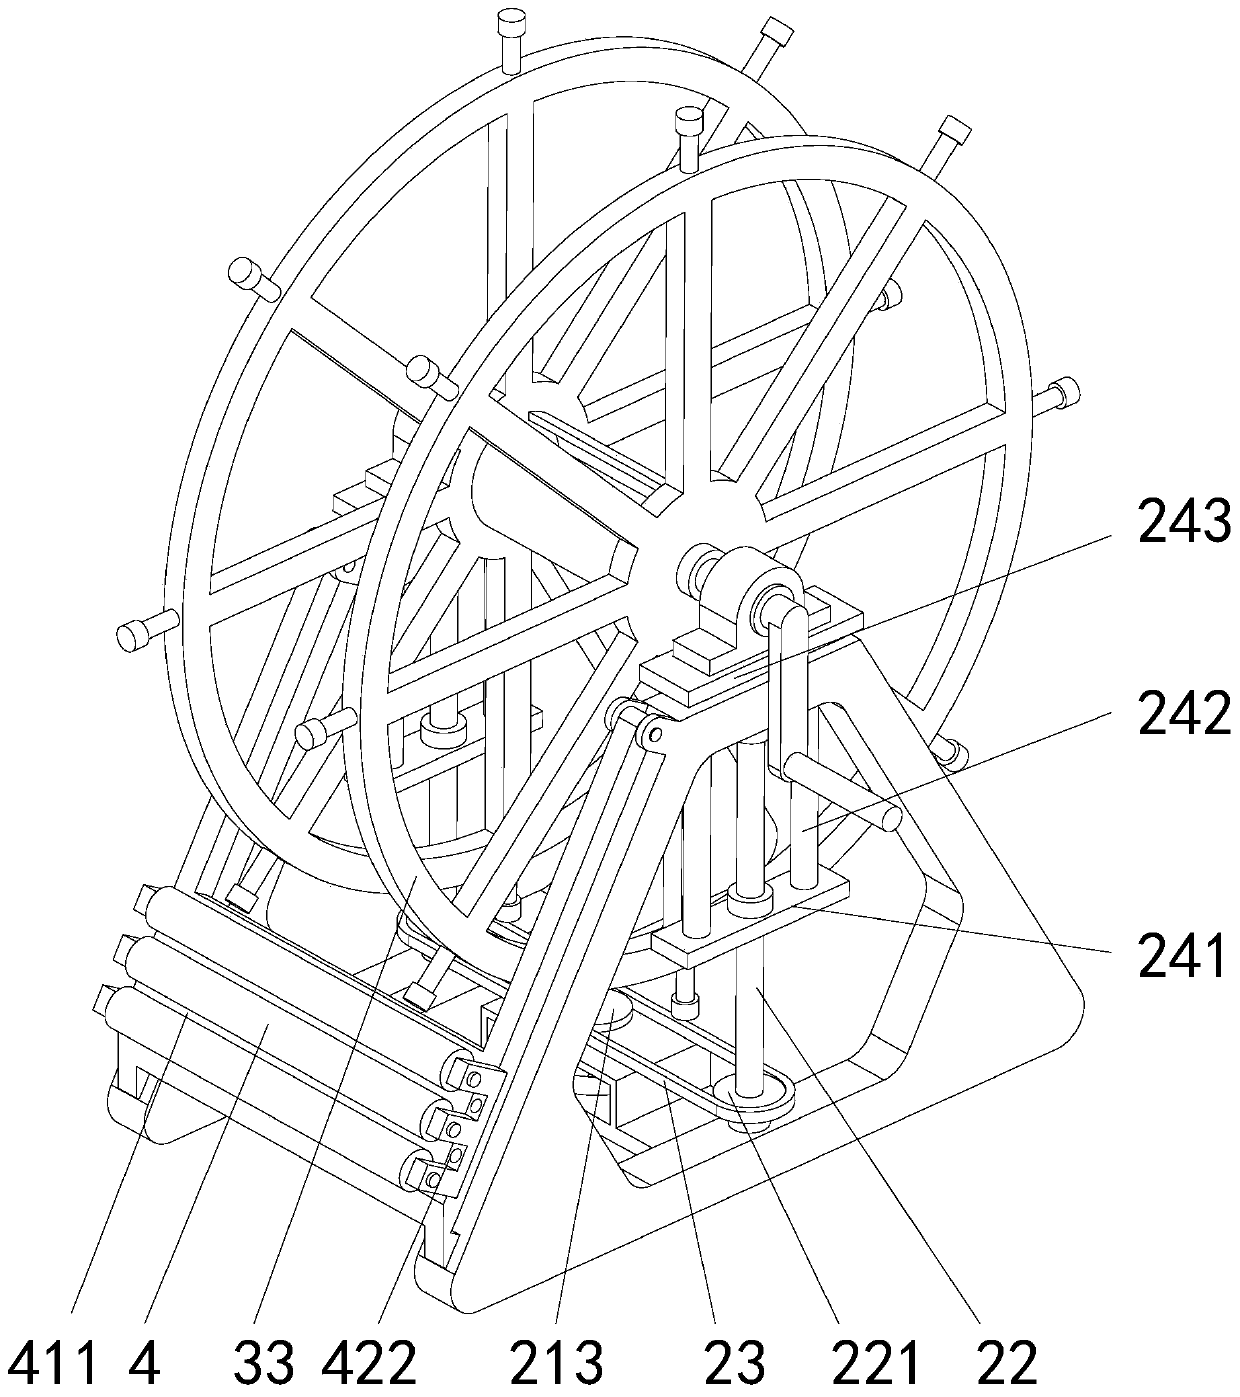 Anti-intertwining winding device for fire hydrant water hose of fire-fighting equipment